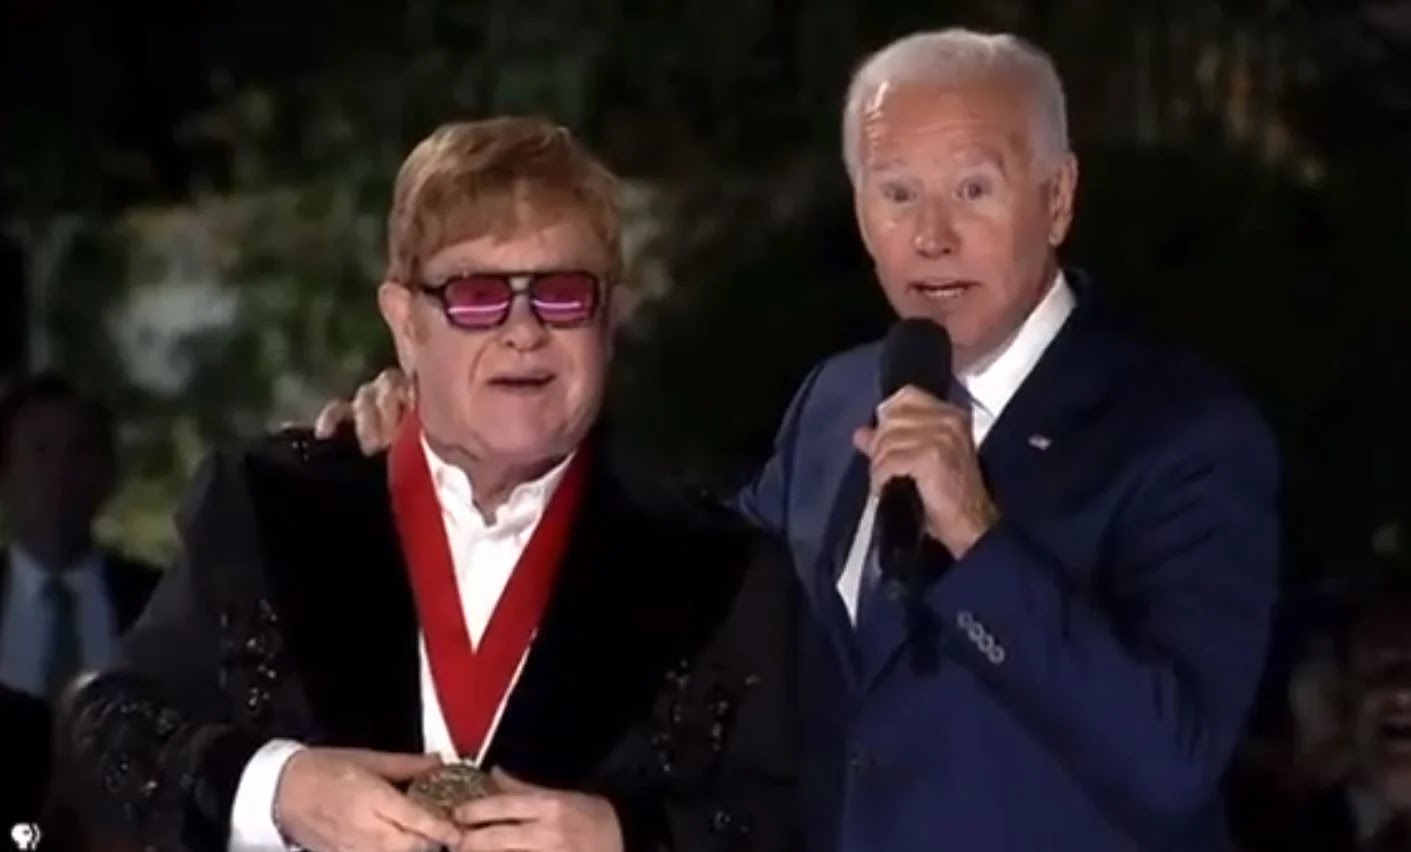 WOW! Joe Biden Wraps His Arm Around Elton John, Then Tells Crowd, “It’s All His Fault We’re Spending $6 Billion on HIV and AIDS this Month” (VIDEO)